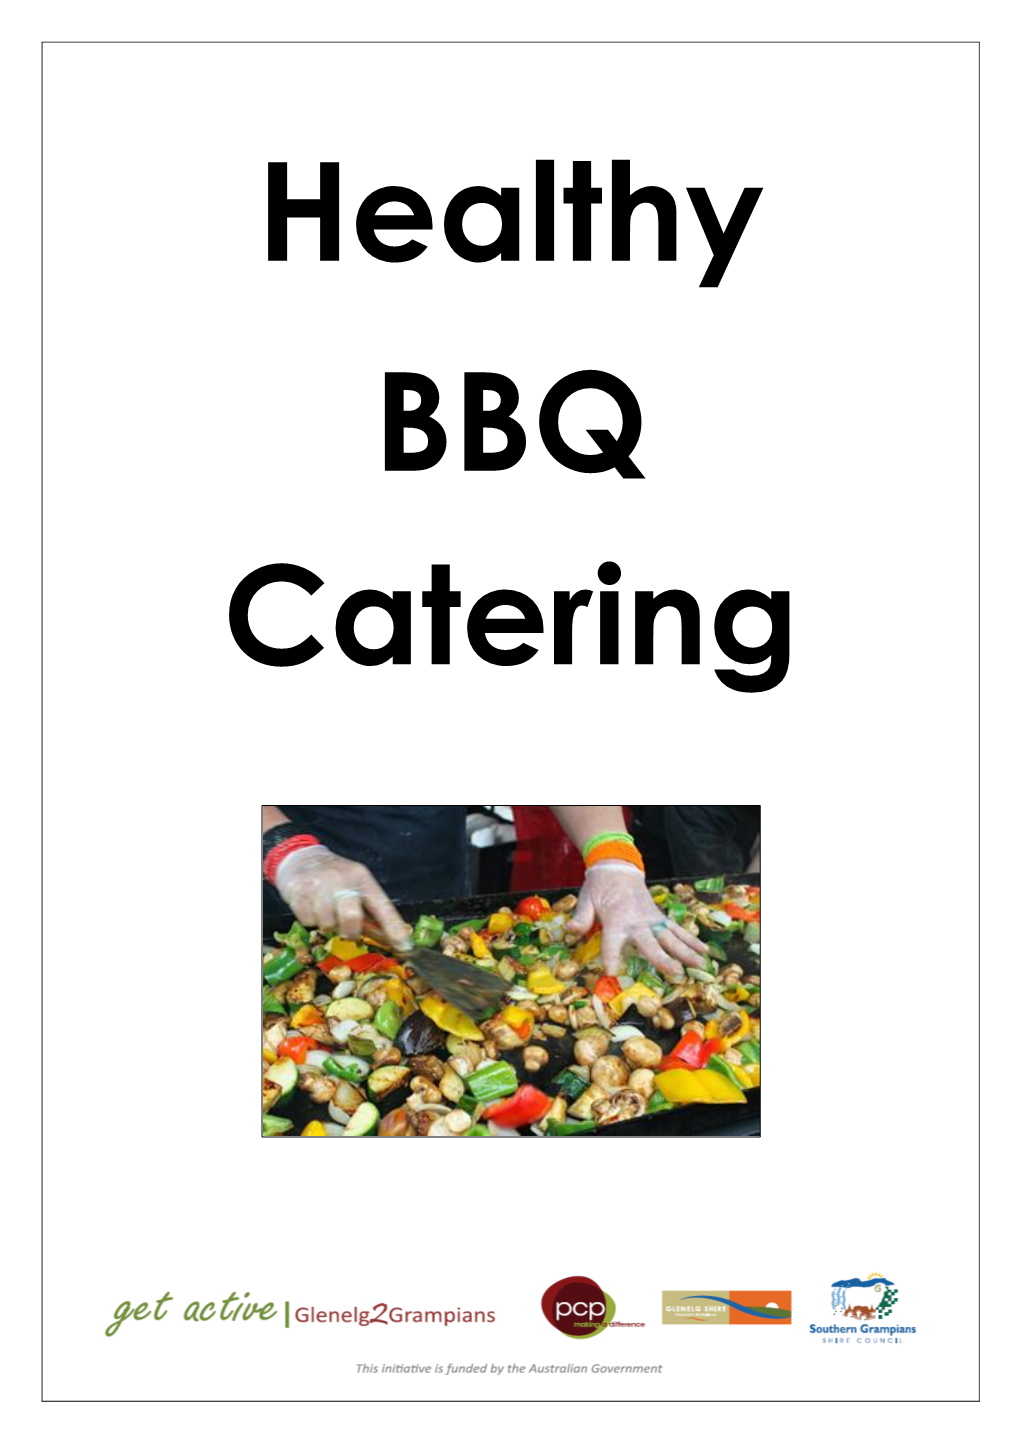 Healthy BBQ Catering